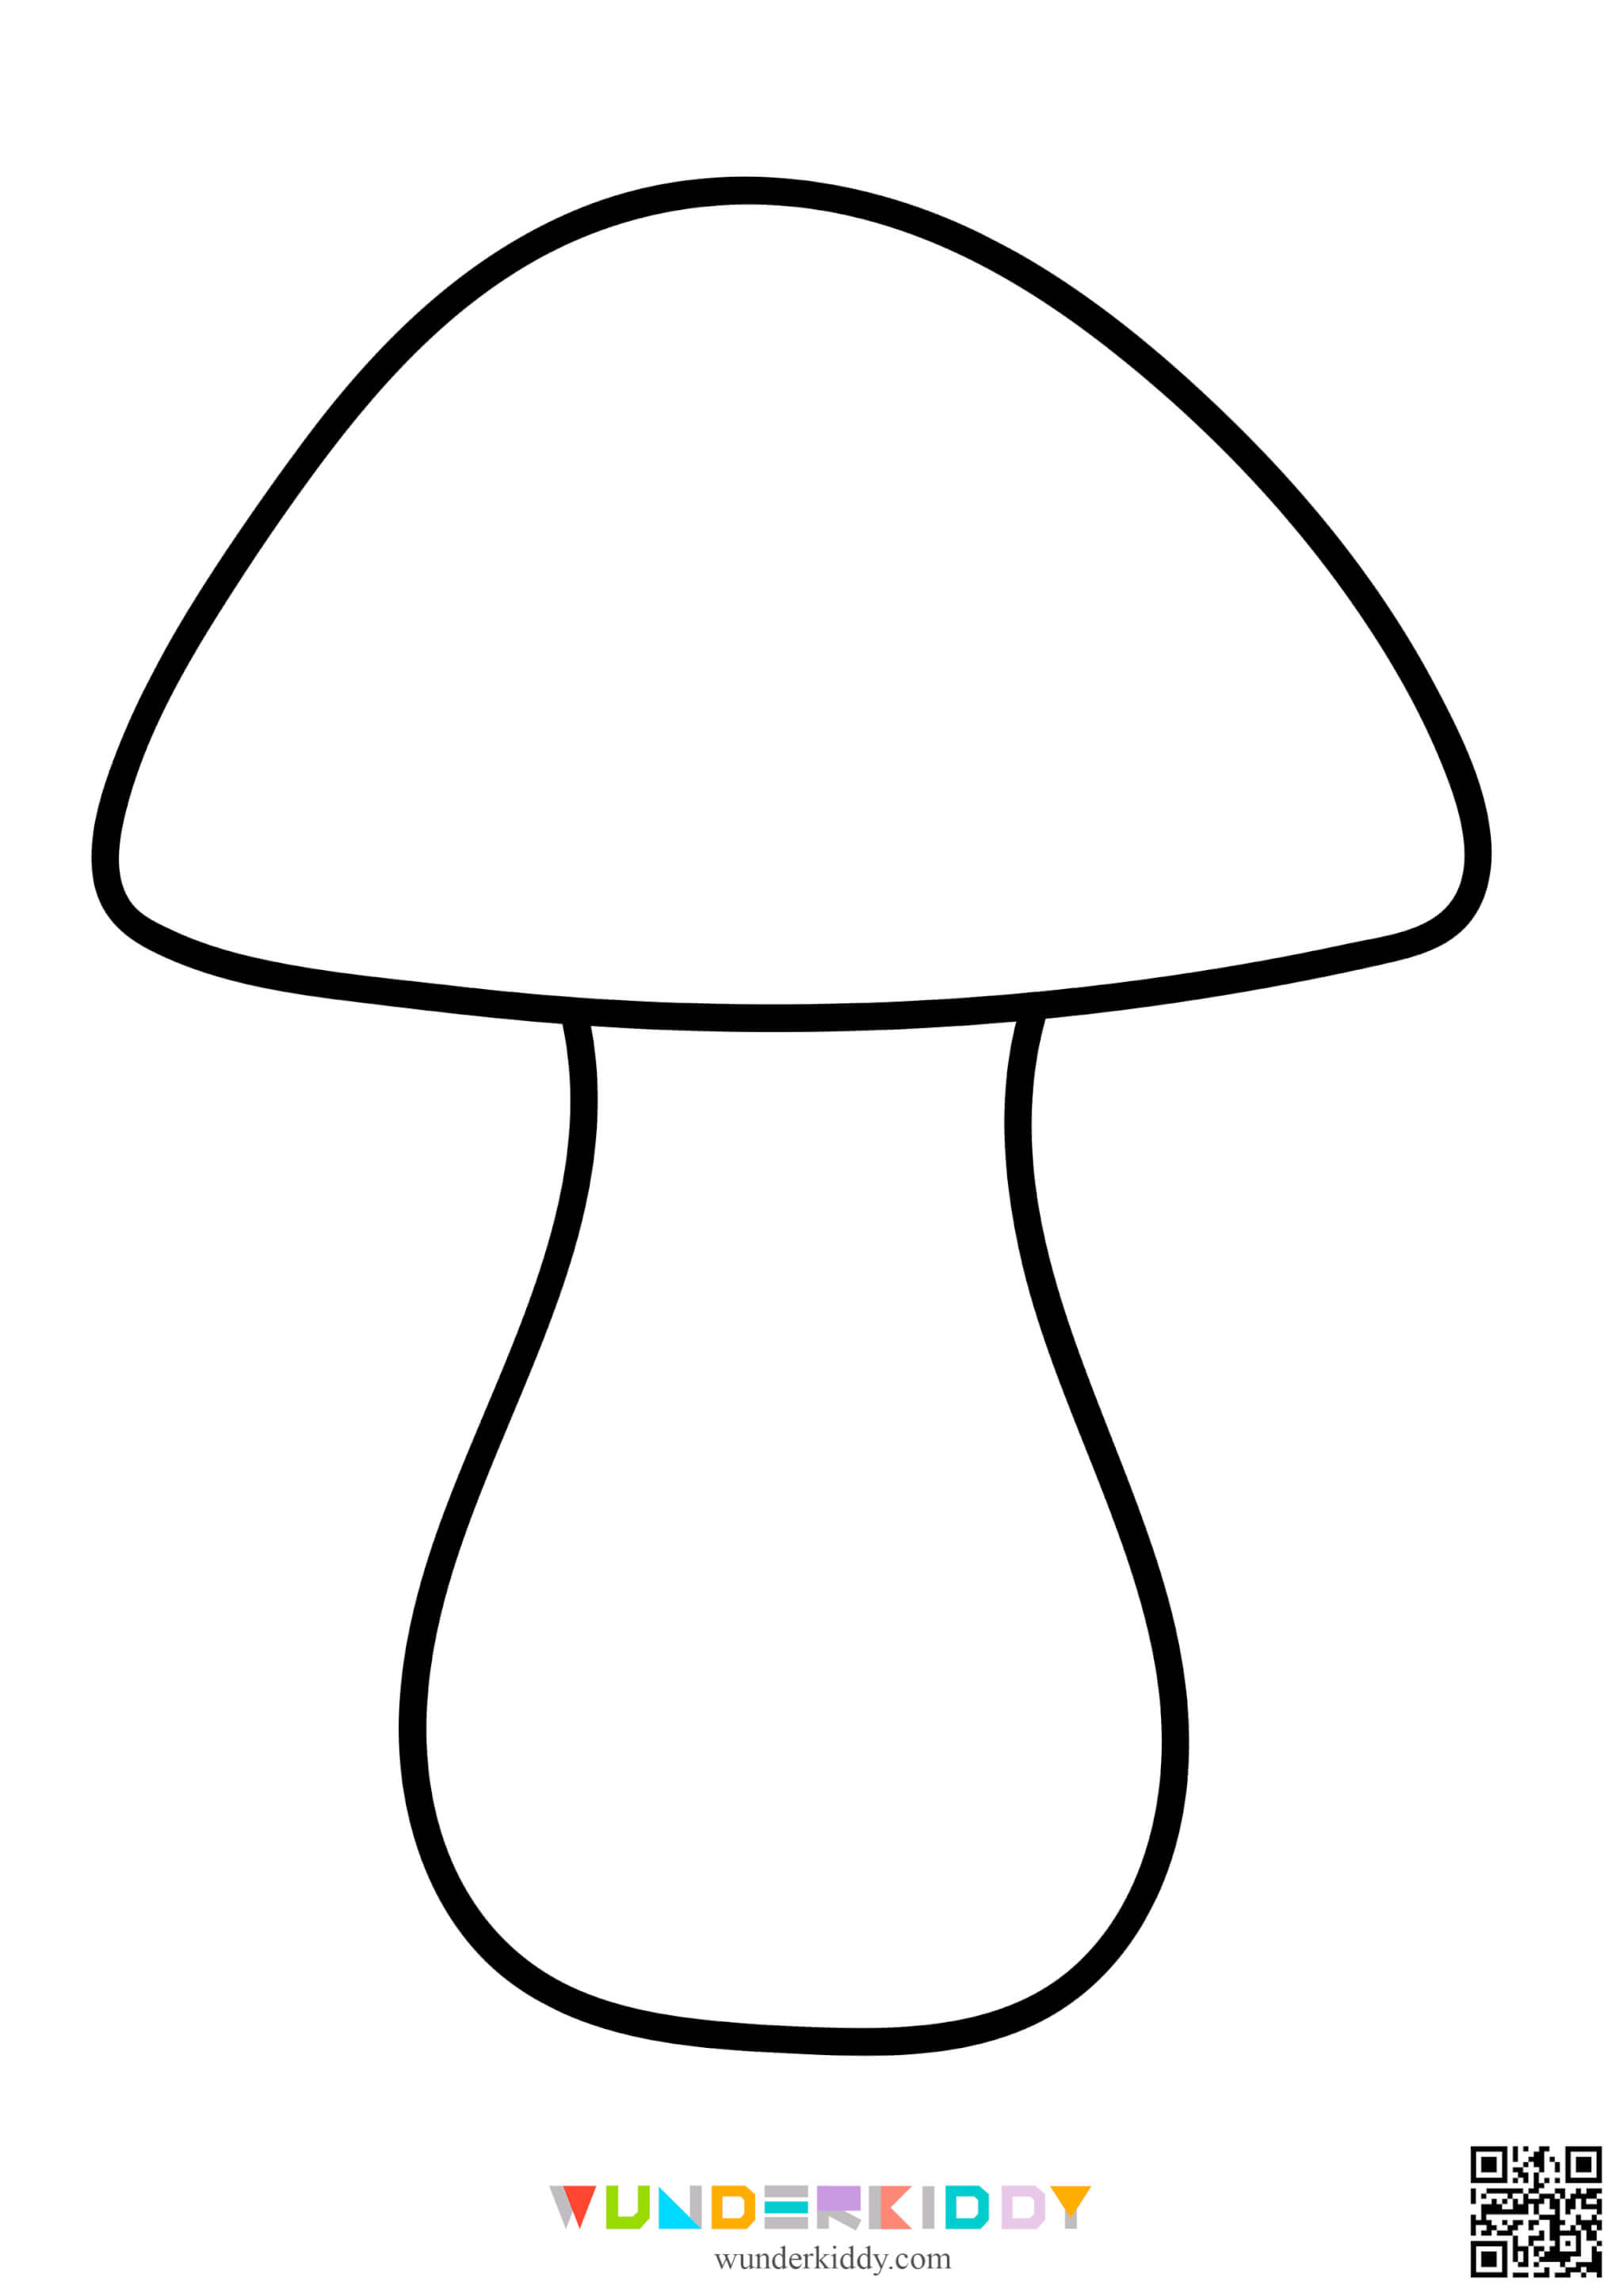 Fall Coloring Pages - Image 22